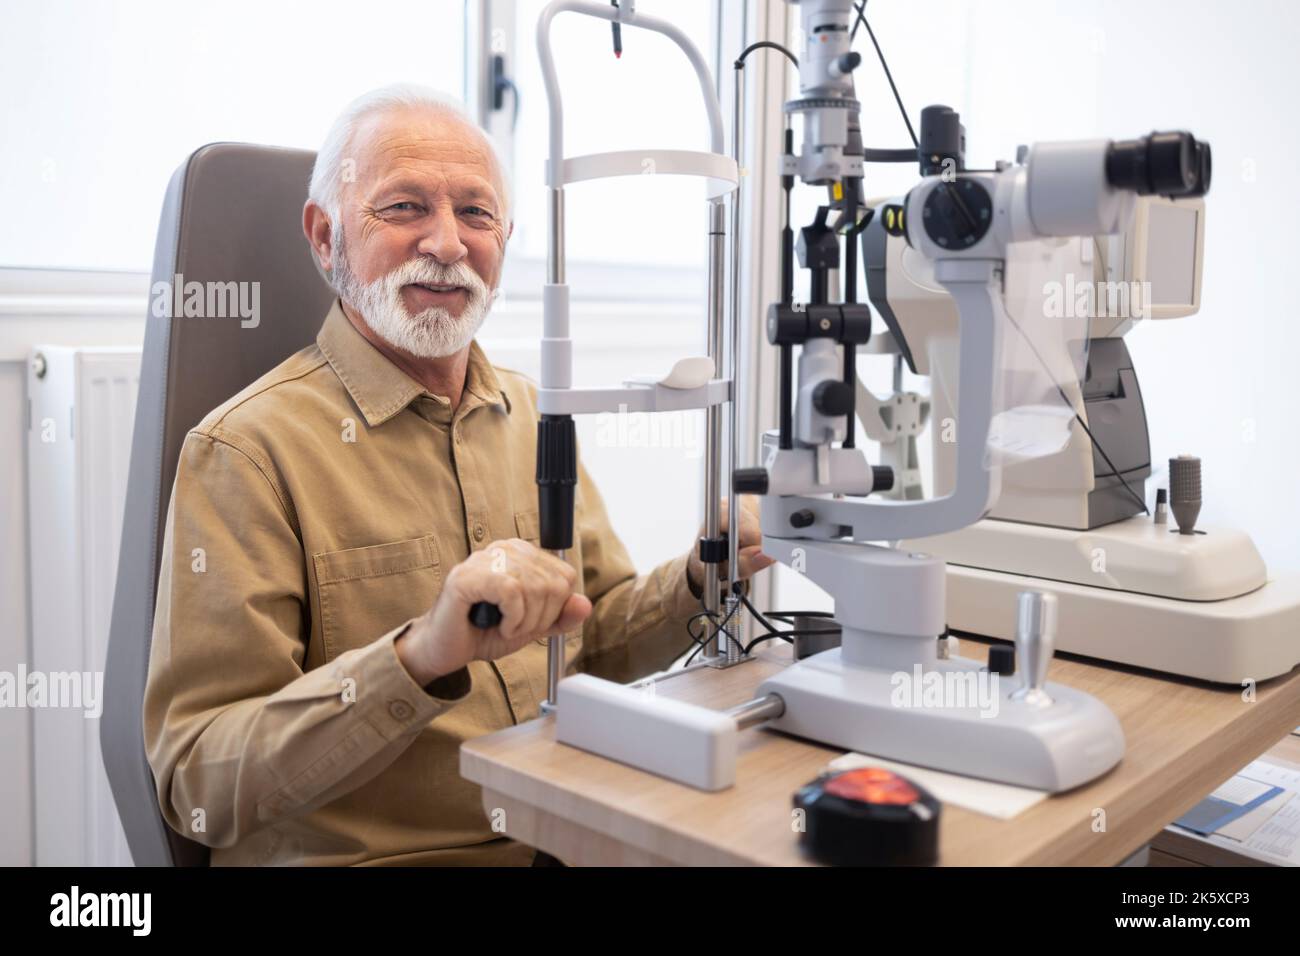 Older man smiling holding clinical equipment Stock Photo